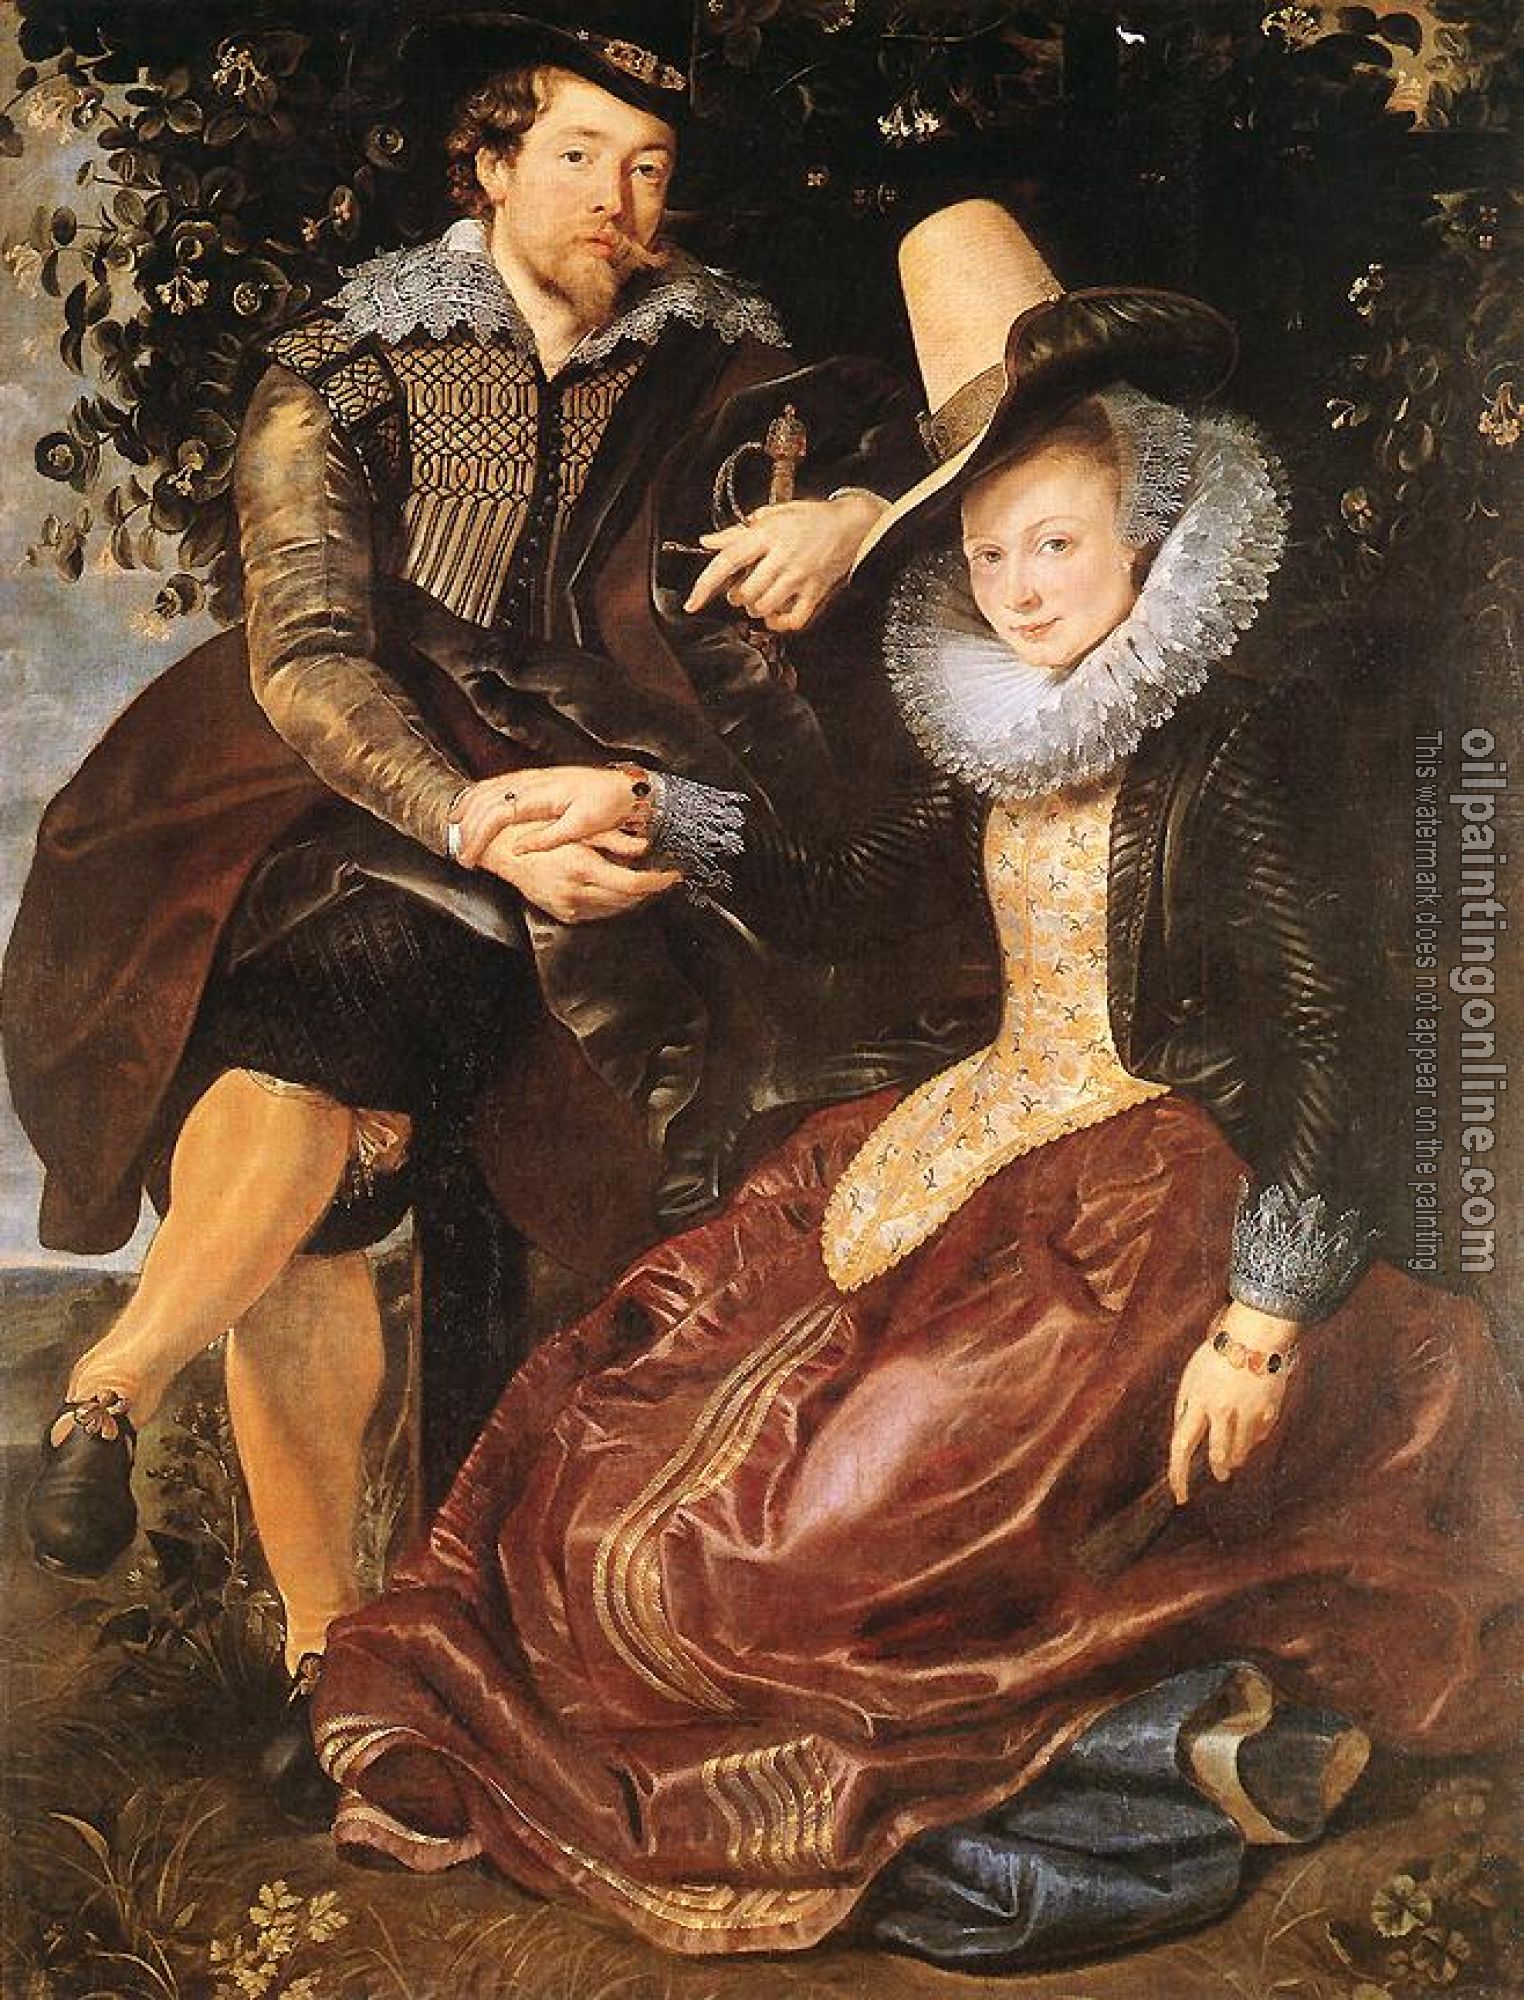 Rubens, Peter Paul - The Artist and His First Wife, Isabella Brant, in the Honeysuckle Bower